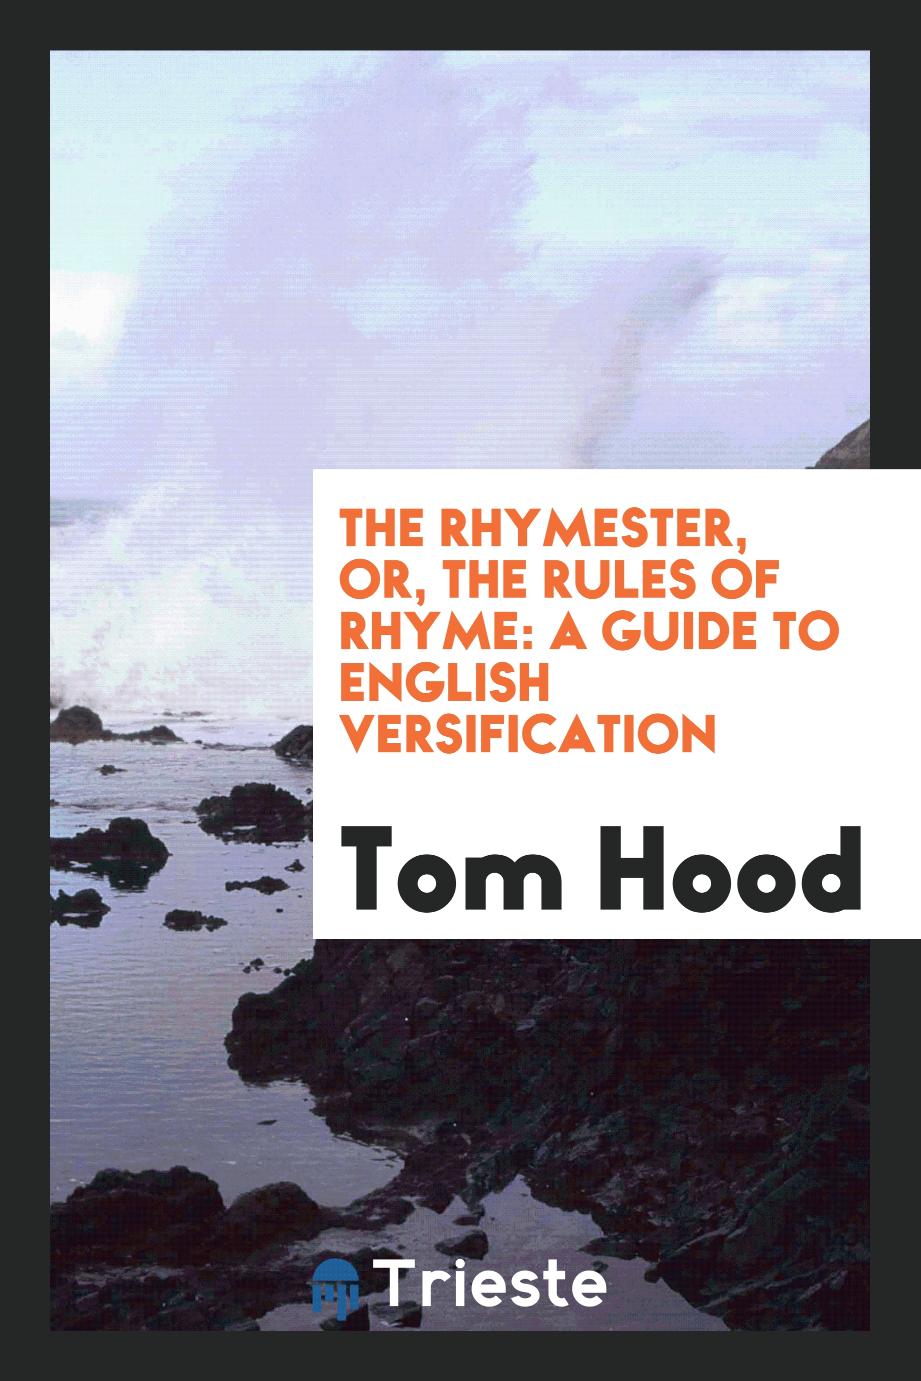 The Rhymester, or, the Rules of Rhyme: A Guide to English Versification